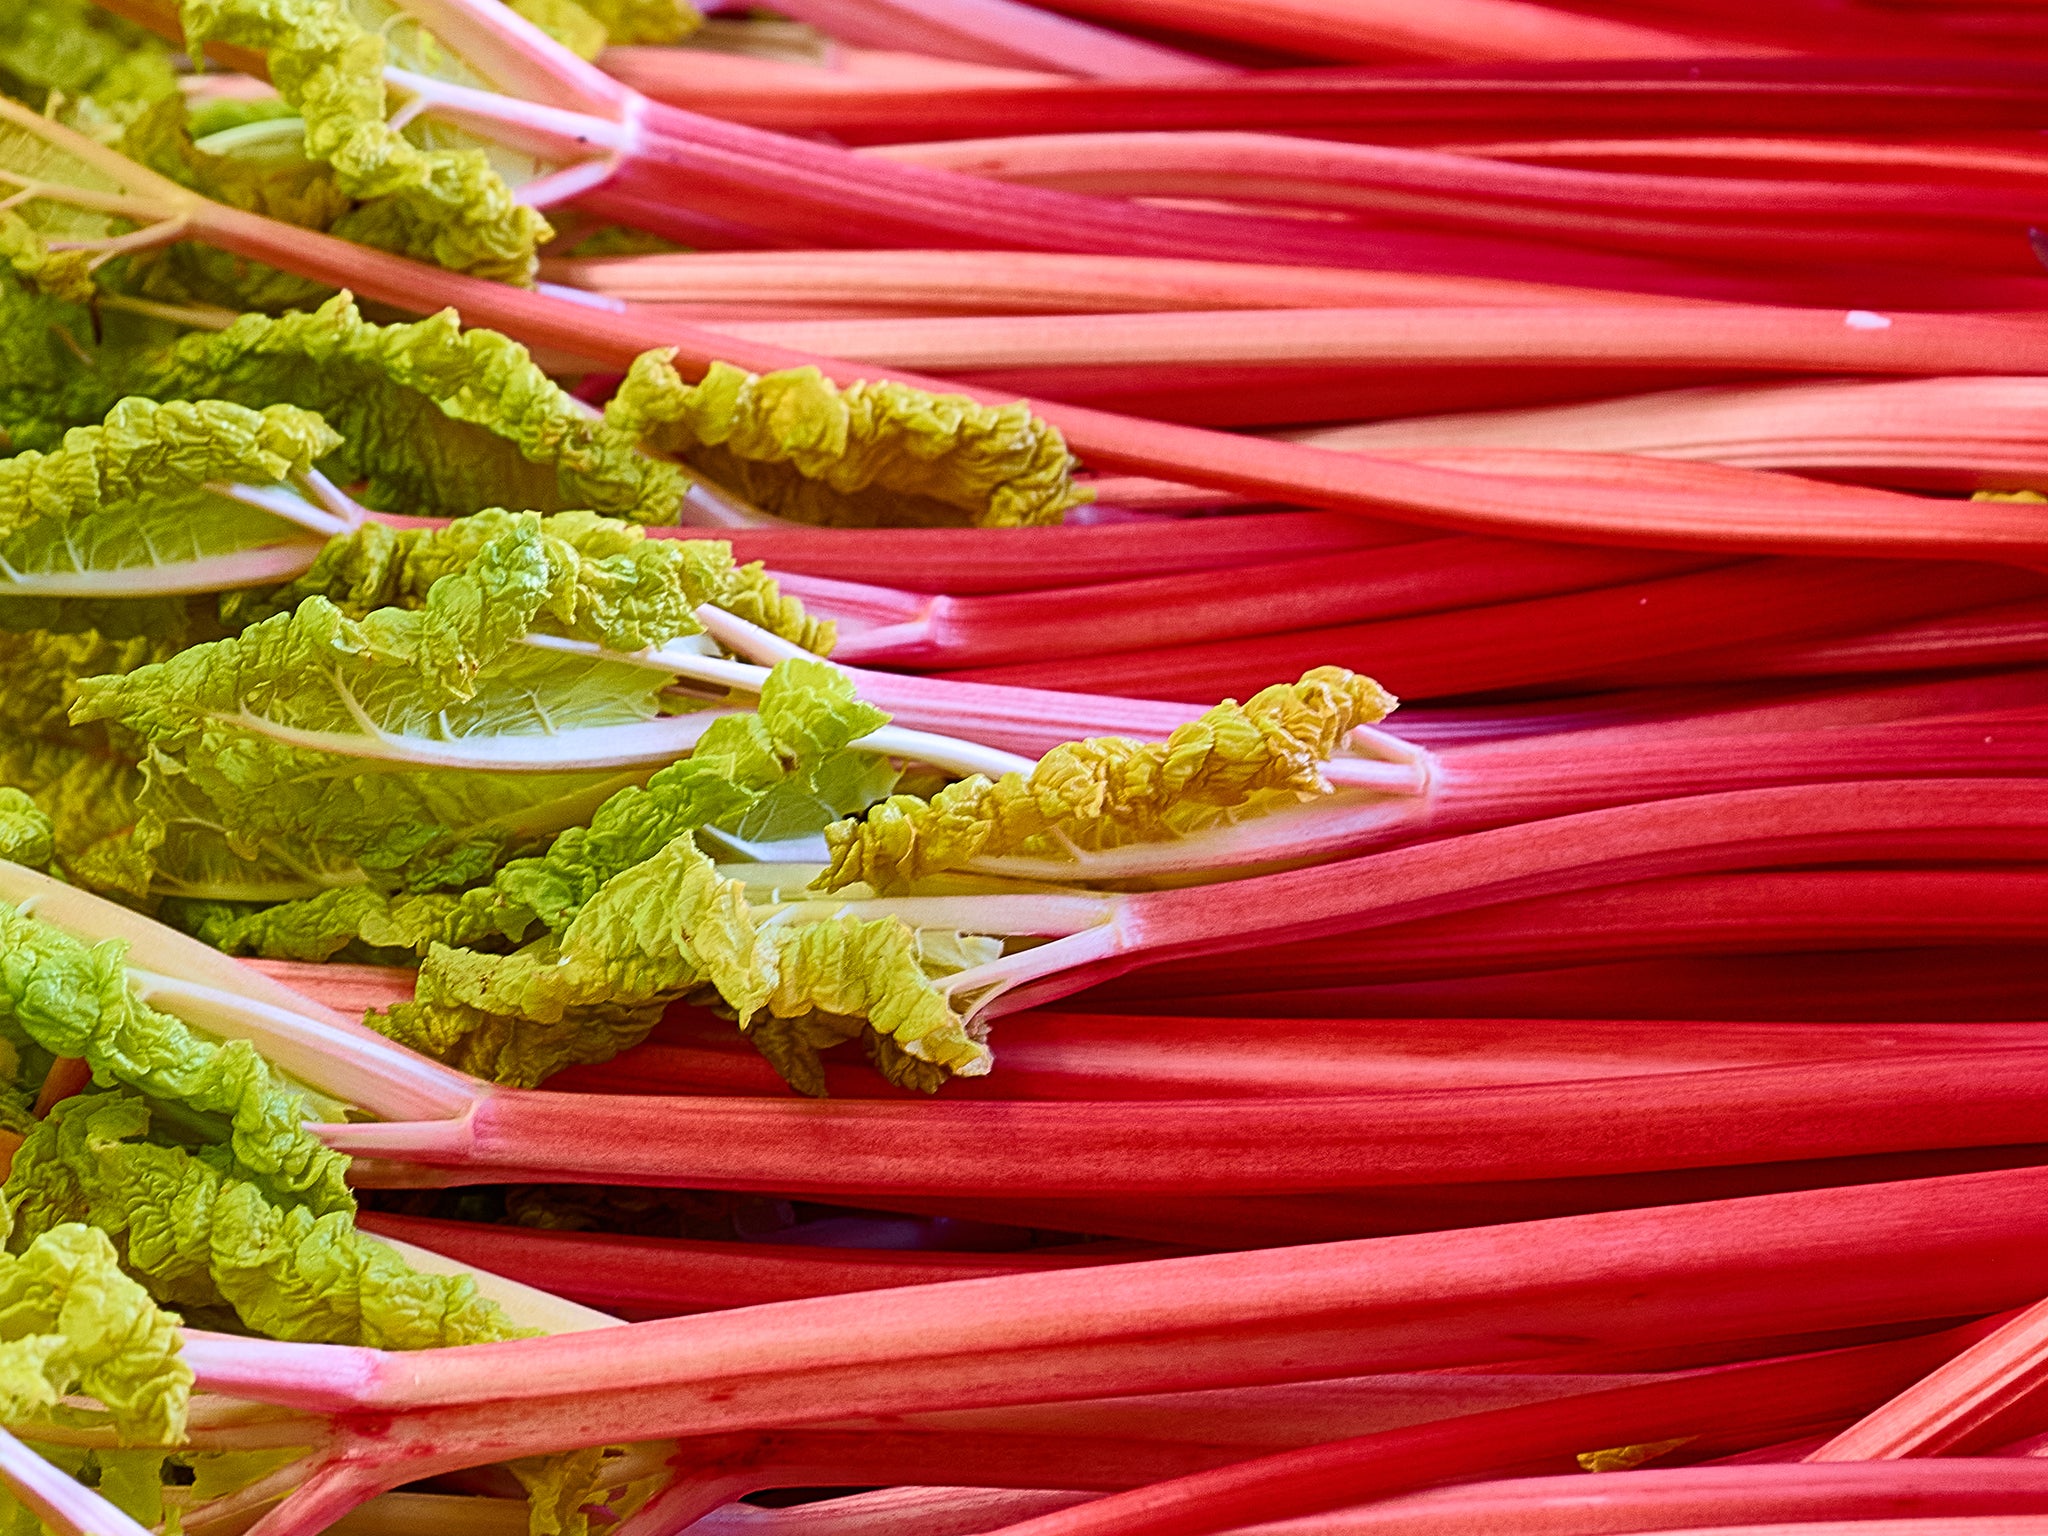 Rhubarb works in both sweet and savoury dishes